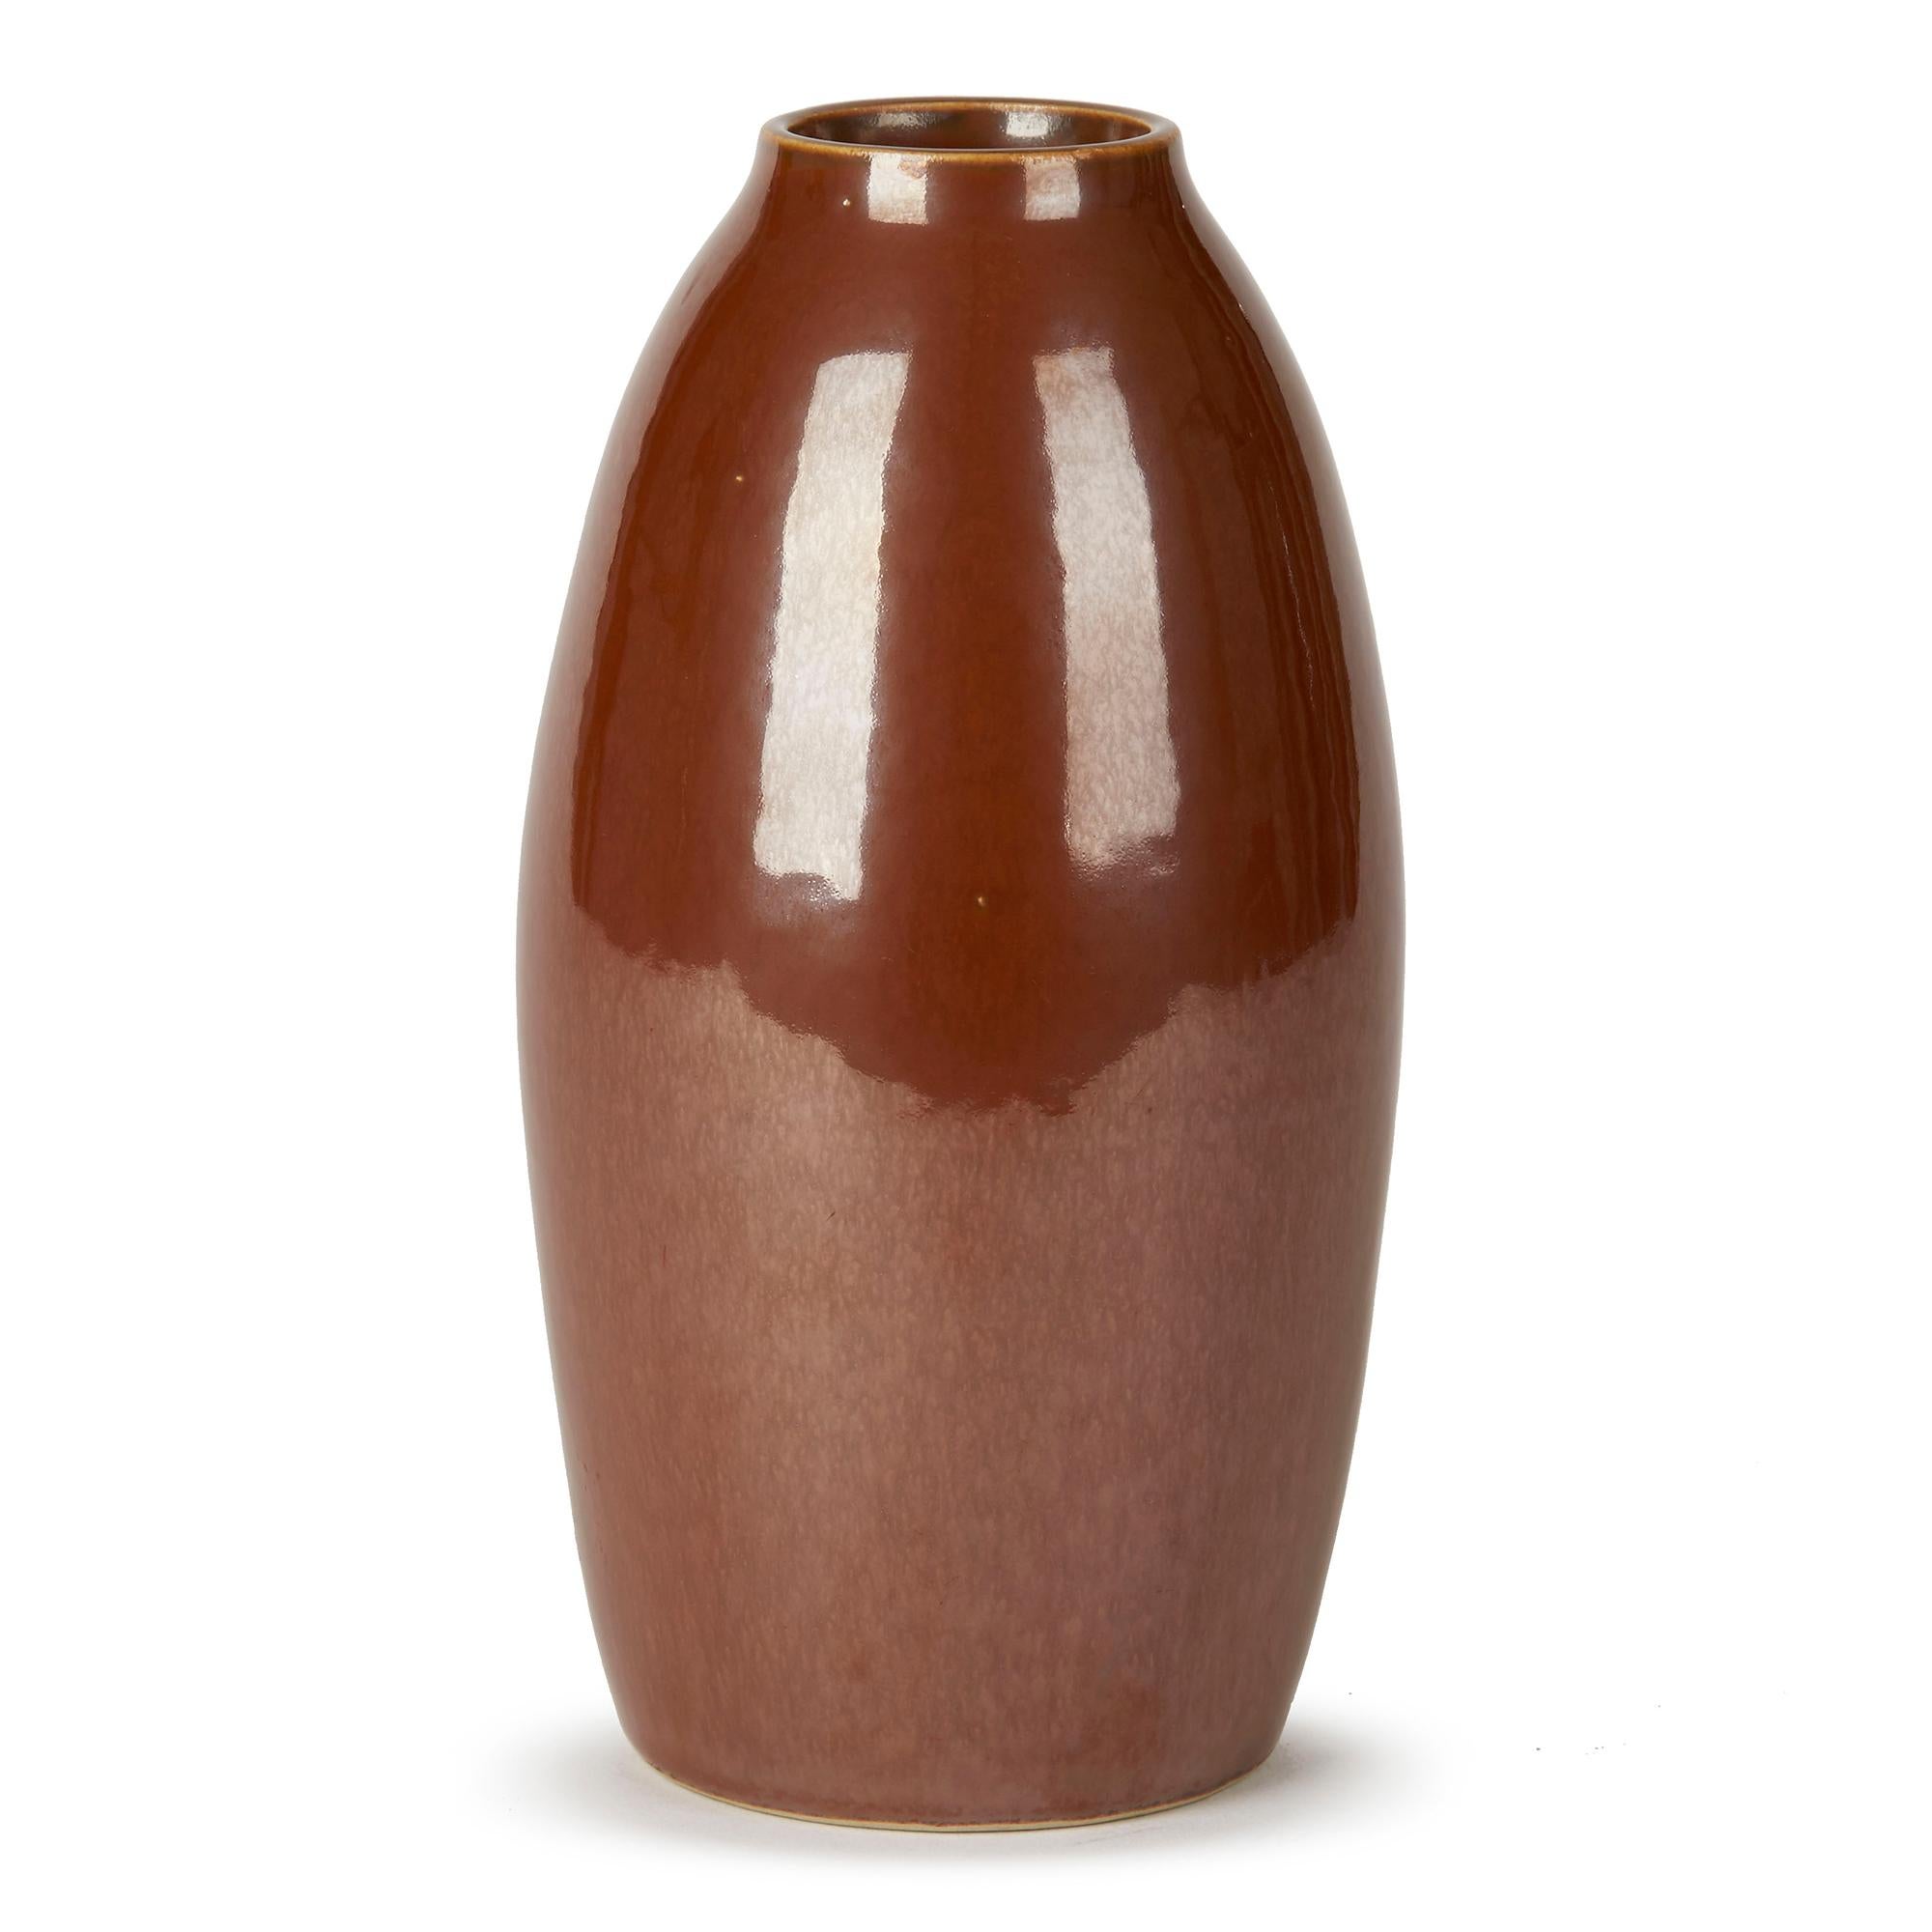 A very fine and stylish midcentury Swedish art pottery vase designed by Carl-Harry Stålhane (1920-1990) for Rörstrand. The simple oval shaped vase is richly decorated in a chocolate brown copper lustre glaze and bears incised makers and artist marks